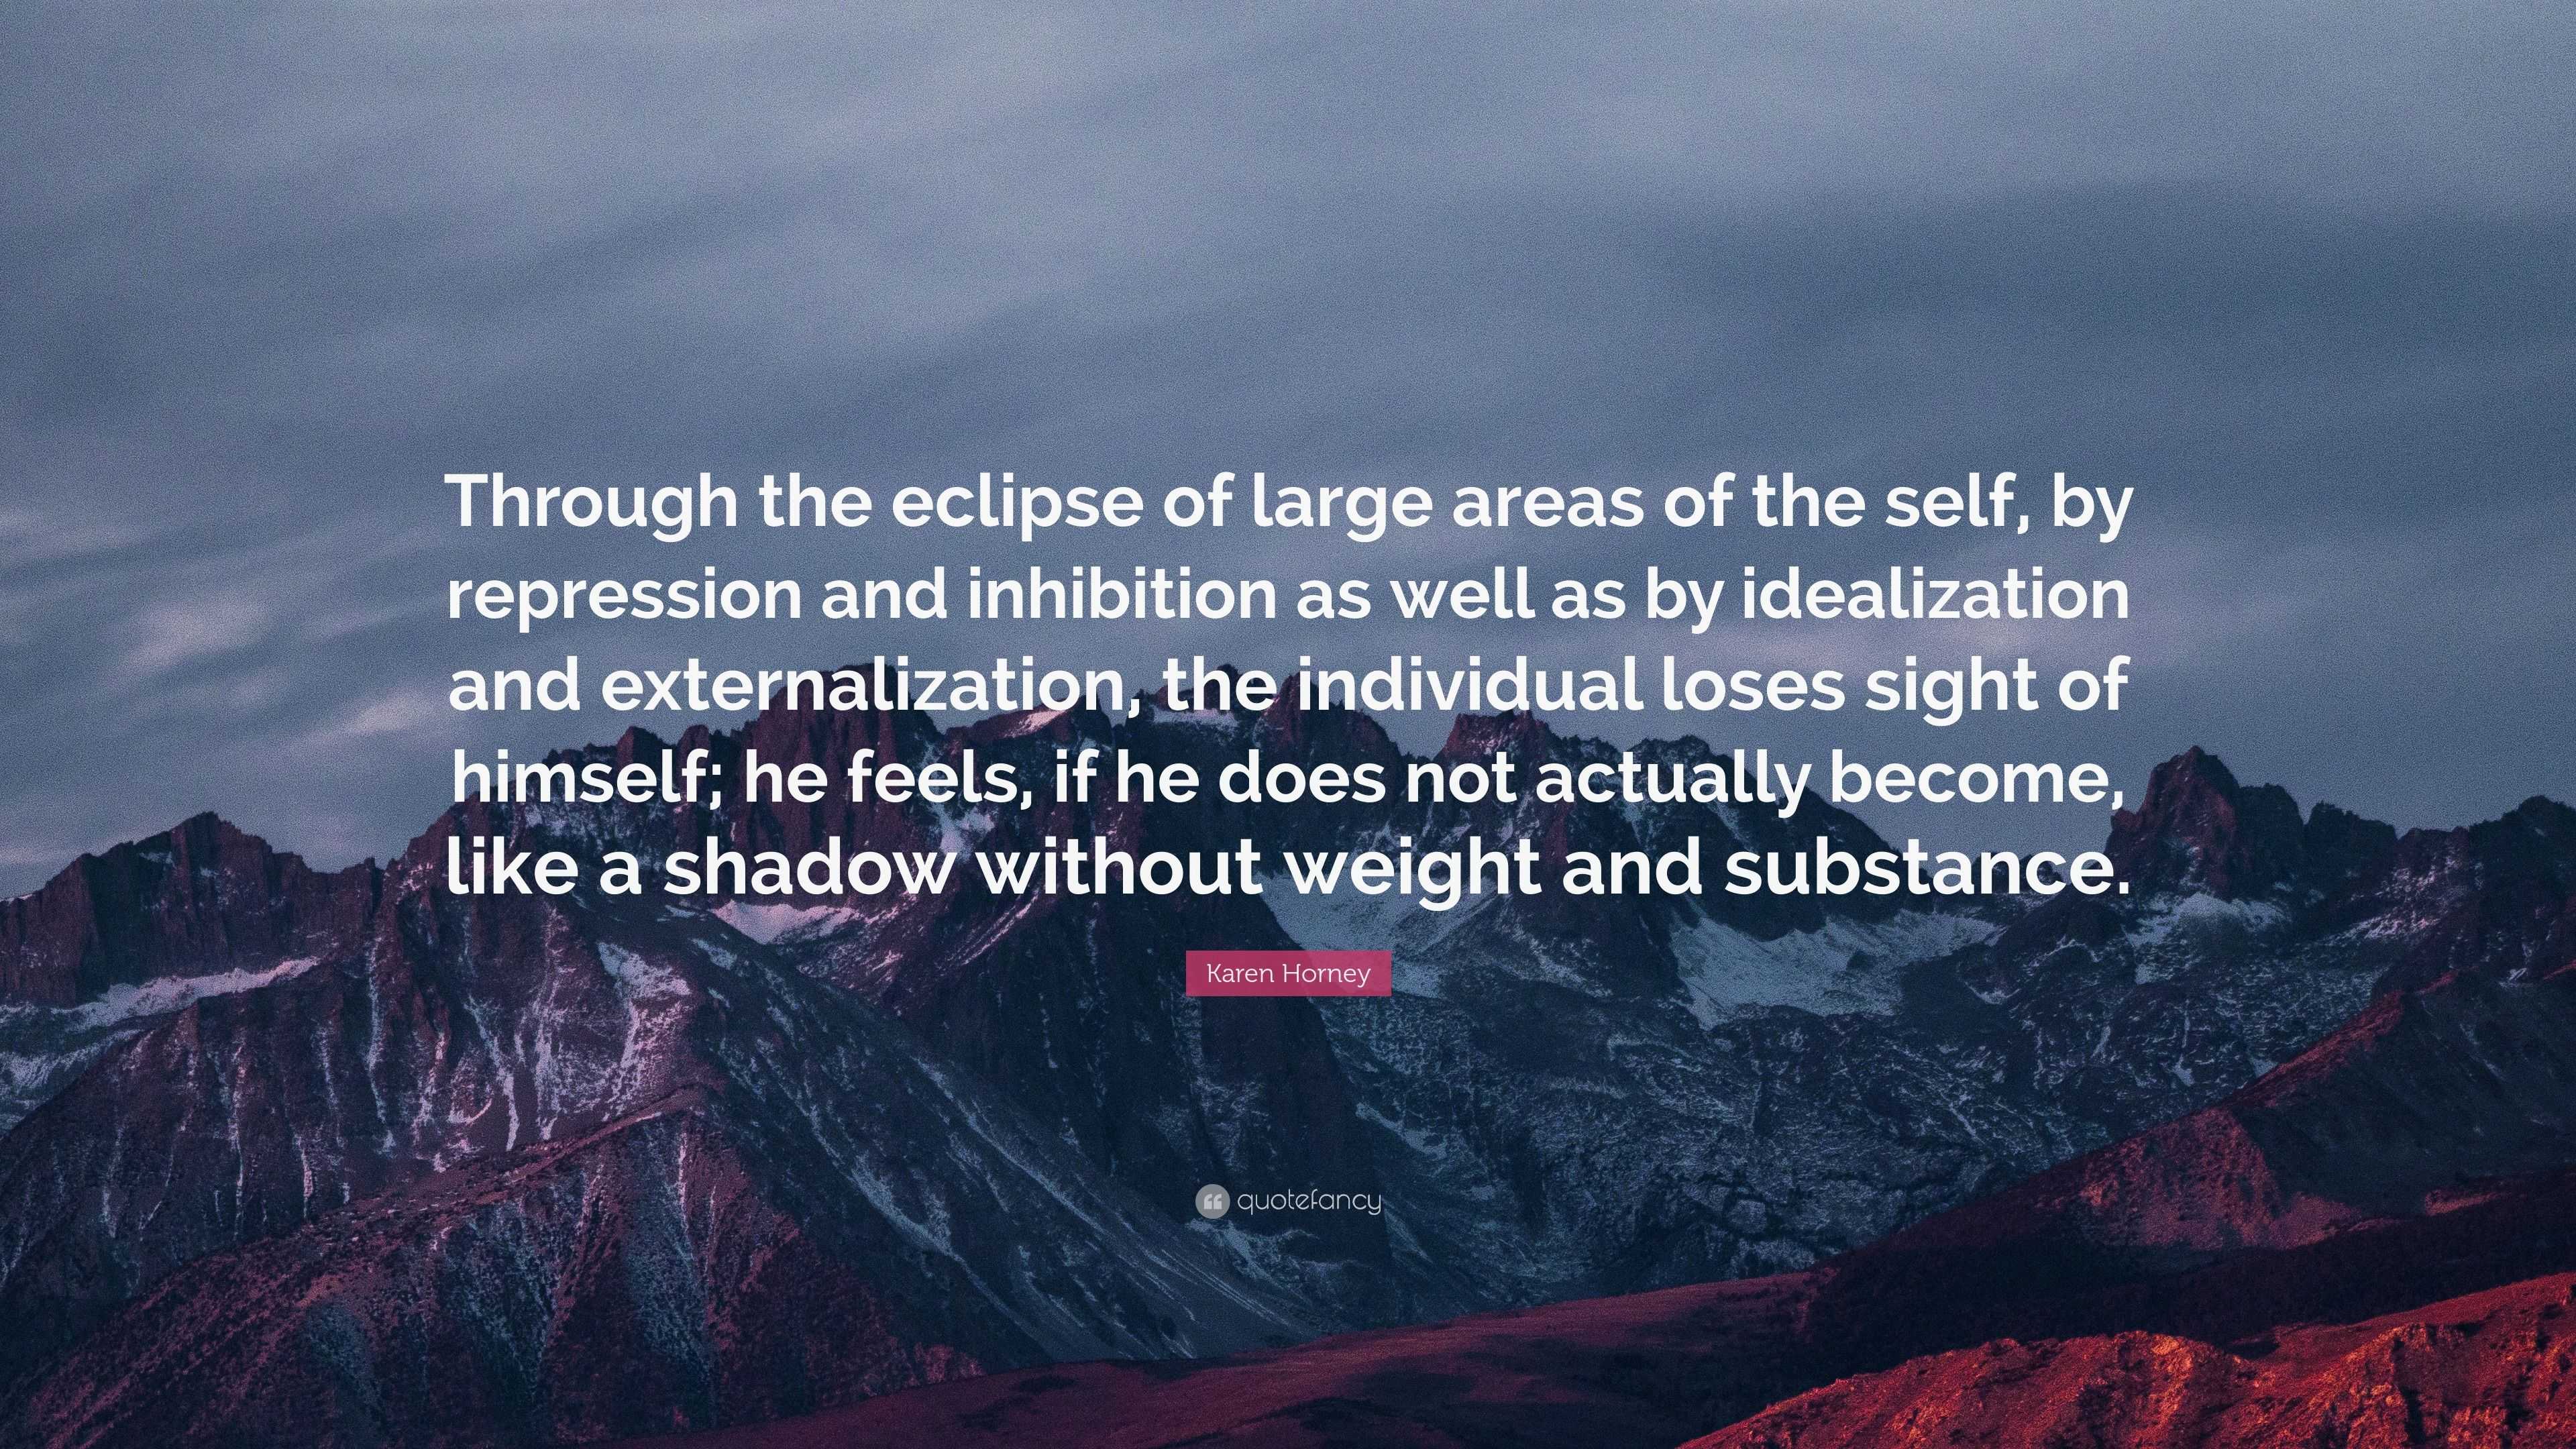 Karen Horney Quote “Through the eclipse of large areas of the self by